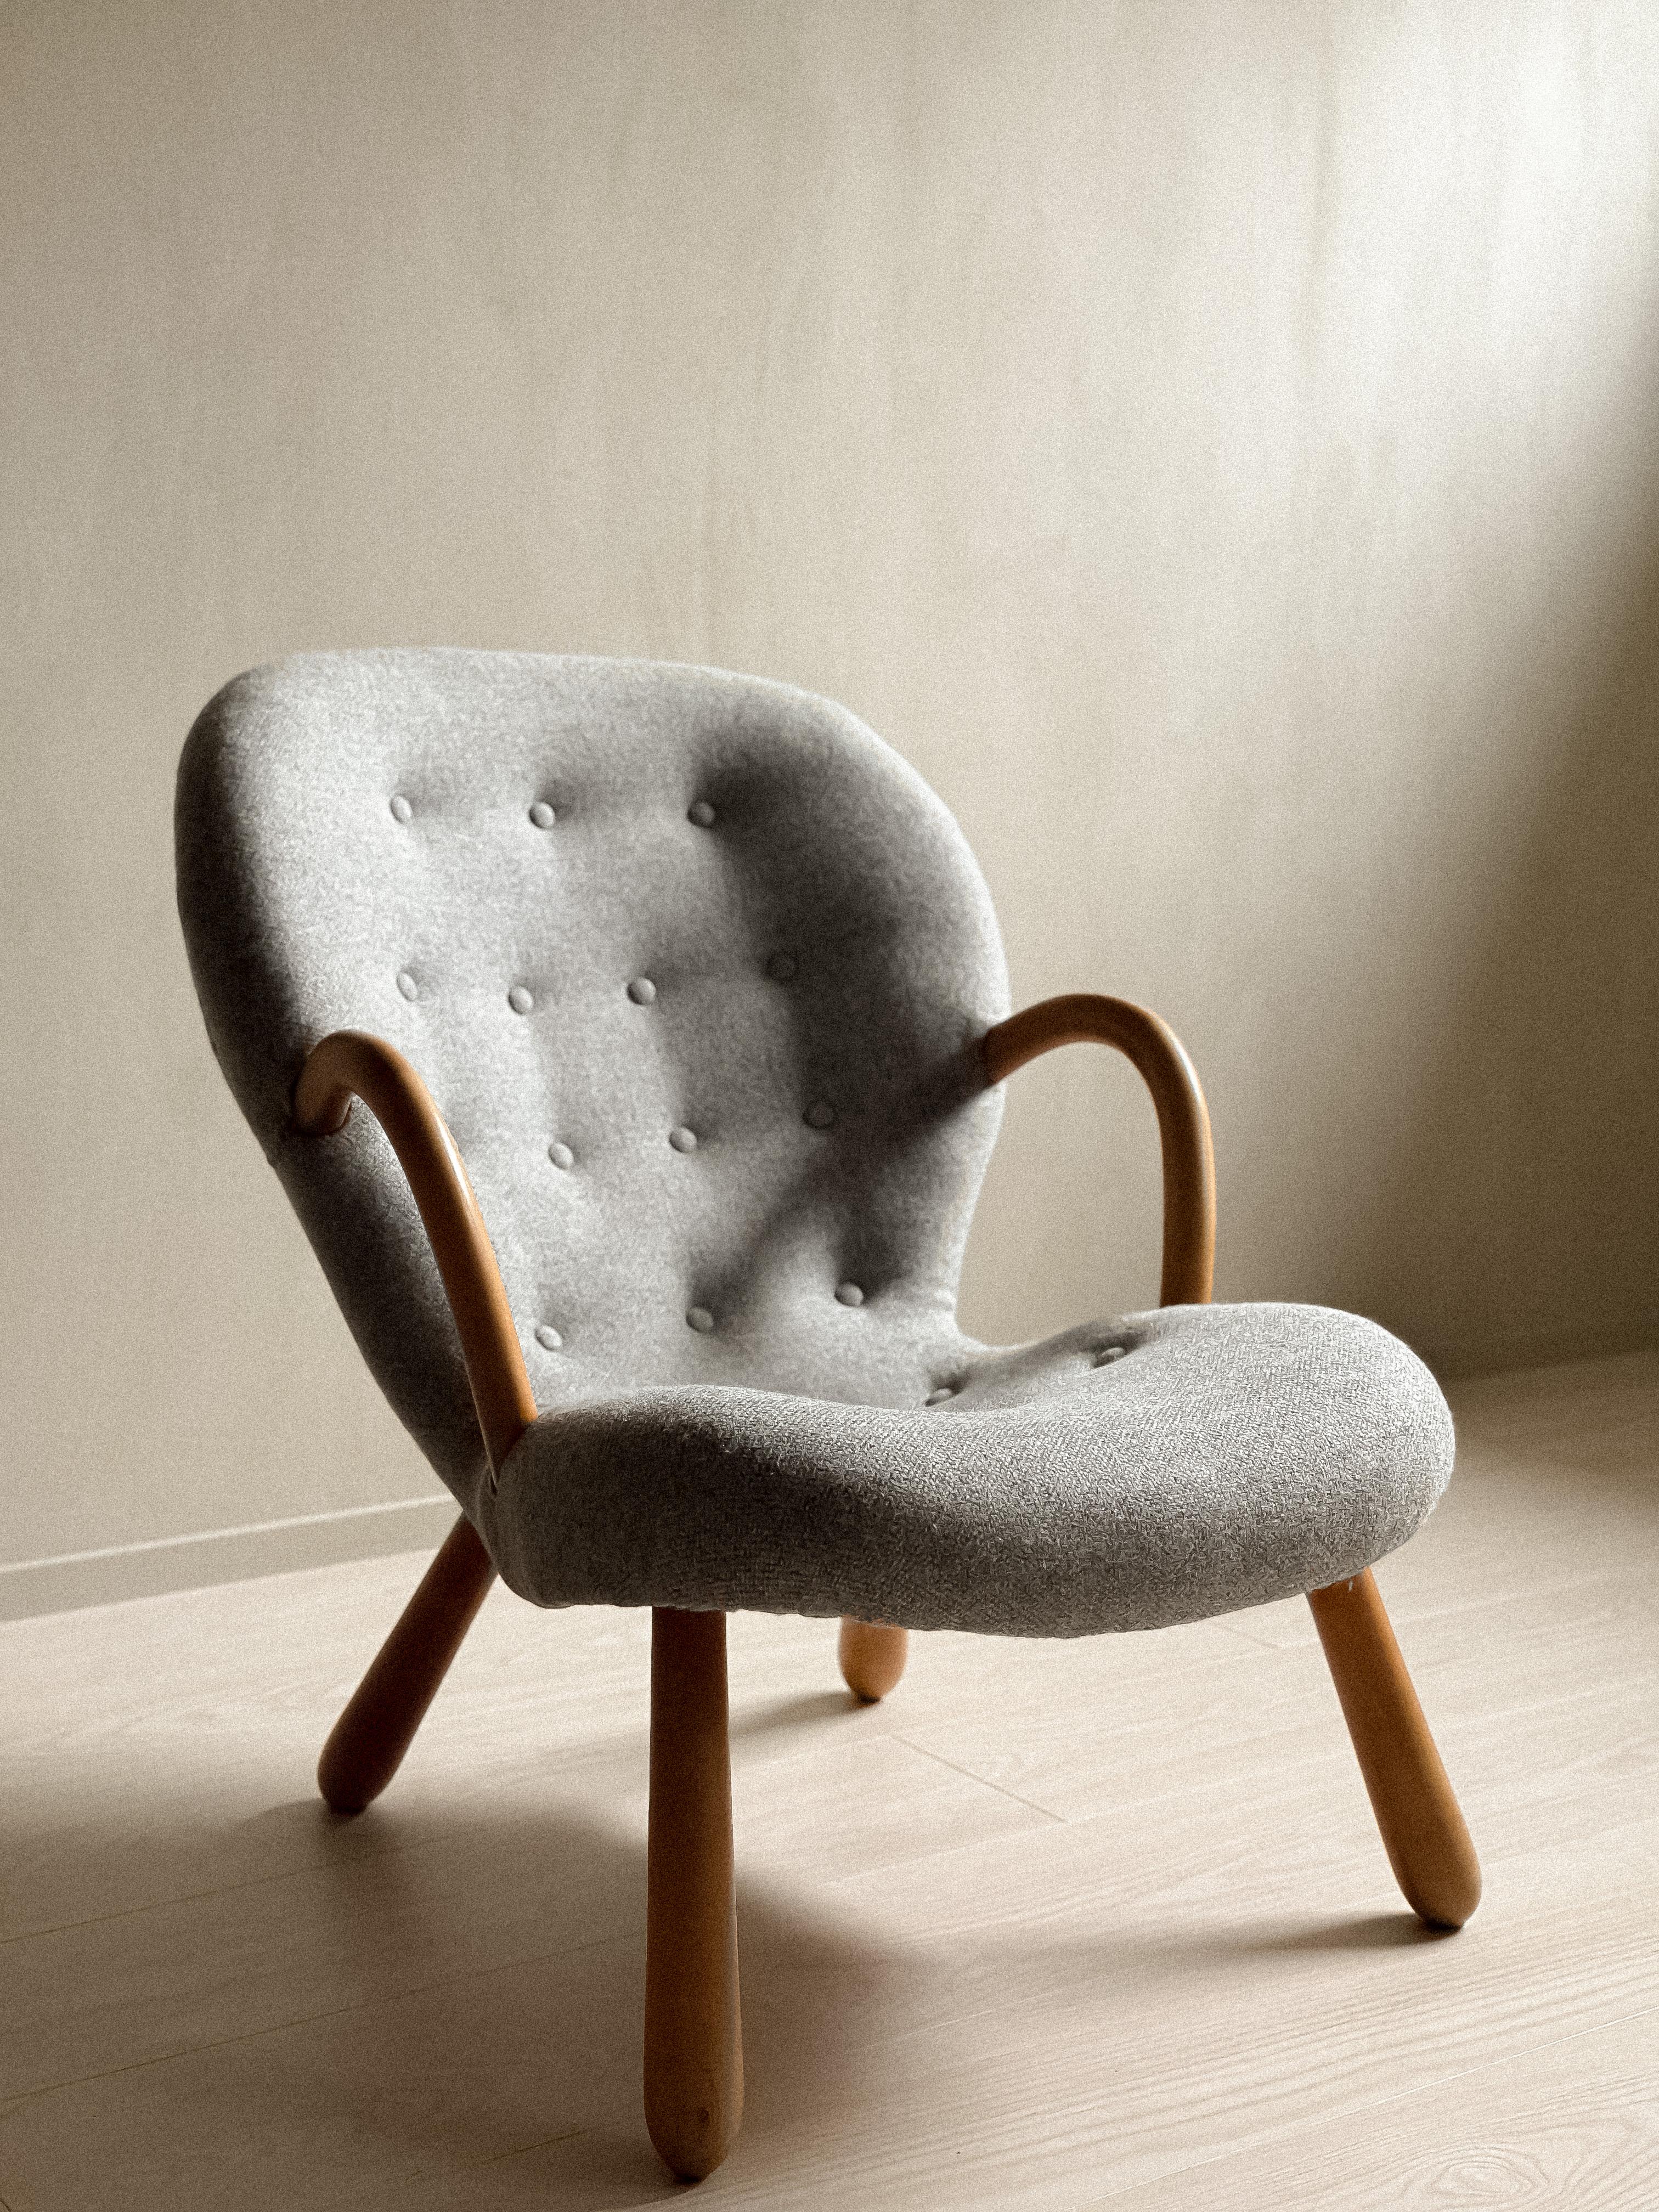 A Vintage and authentic Clam Chair by Arnold Madsen produced by Vik & Blindheim in Norway, 1953. The chair has been later upholsterd in a light grey wool fabric. It can be re-upholstered to meet your preferences.